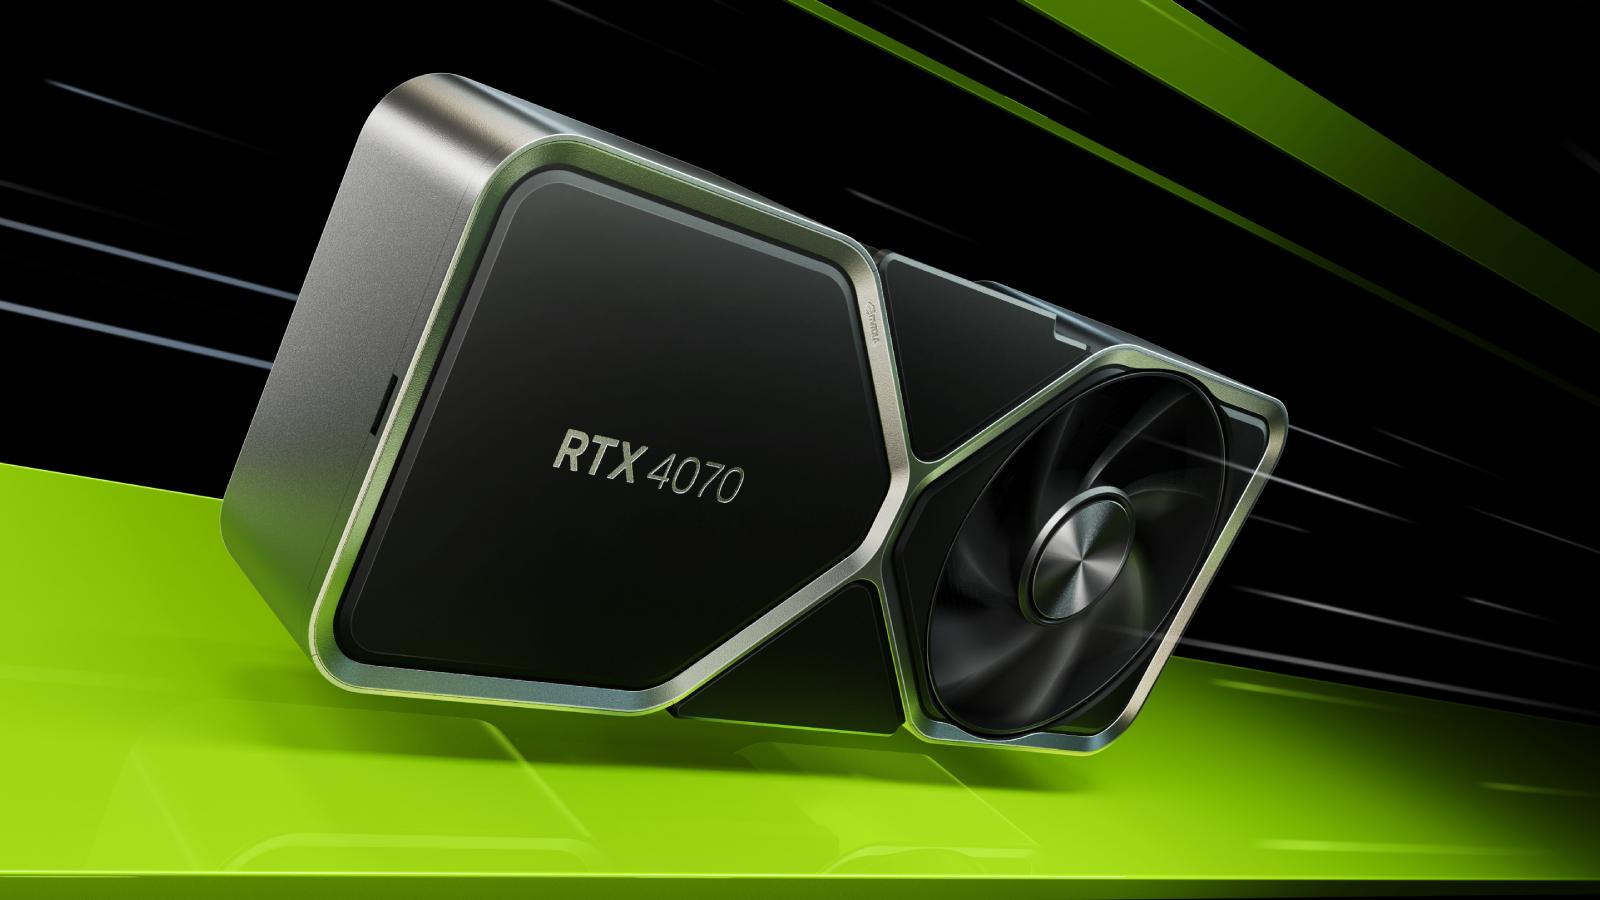 NVIDIA GeForce RTX 4070 Founders Edition Review